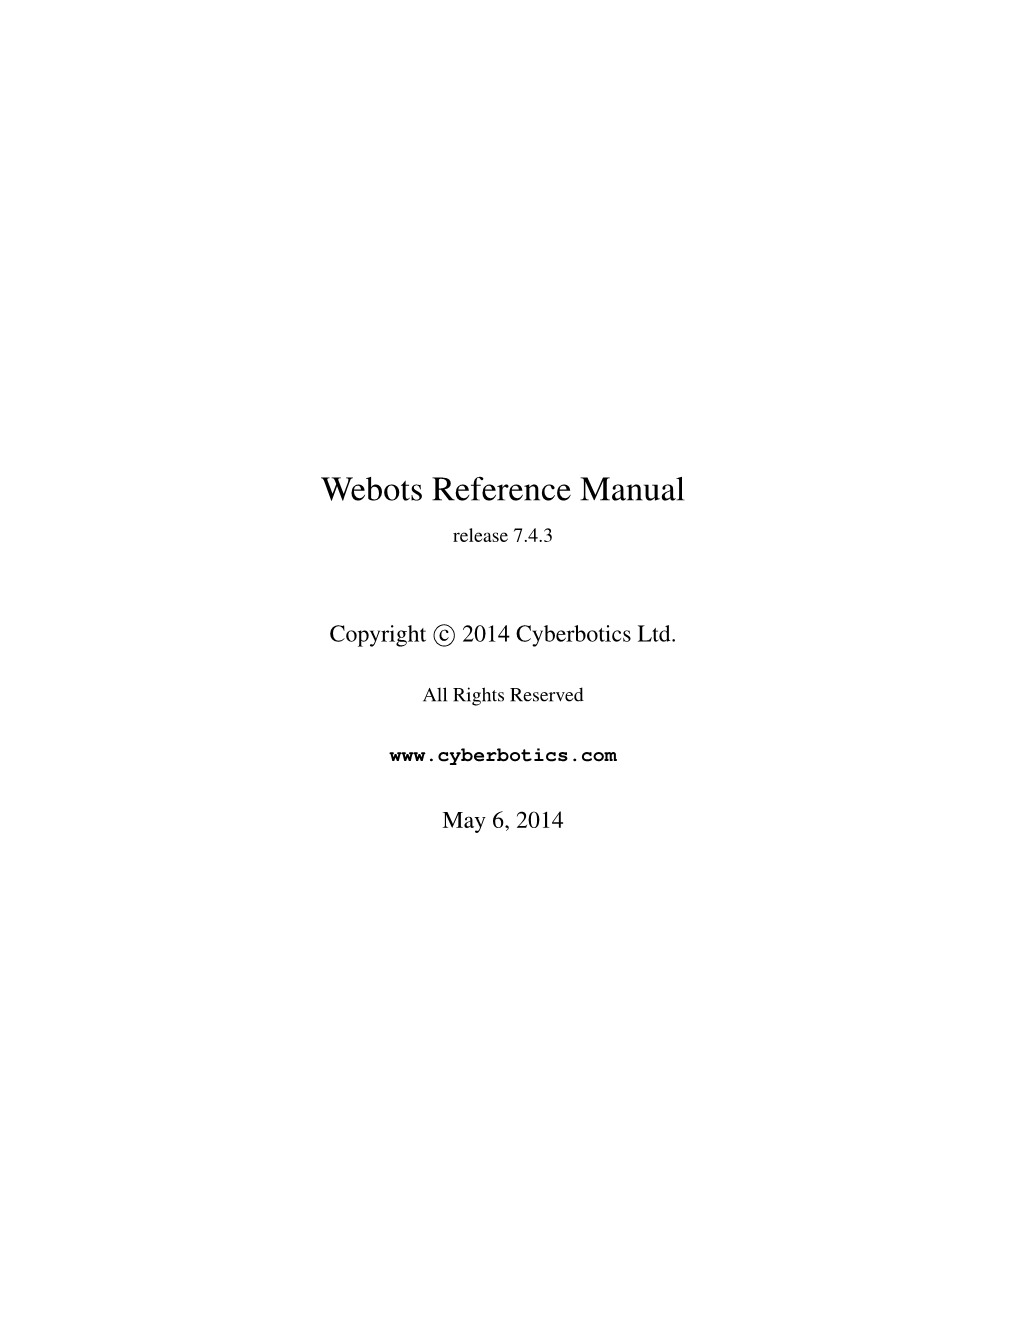 Webots Reference Manual Release 7.4.3